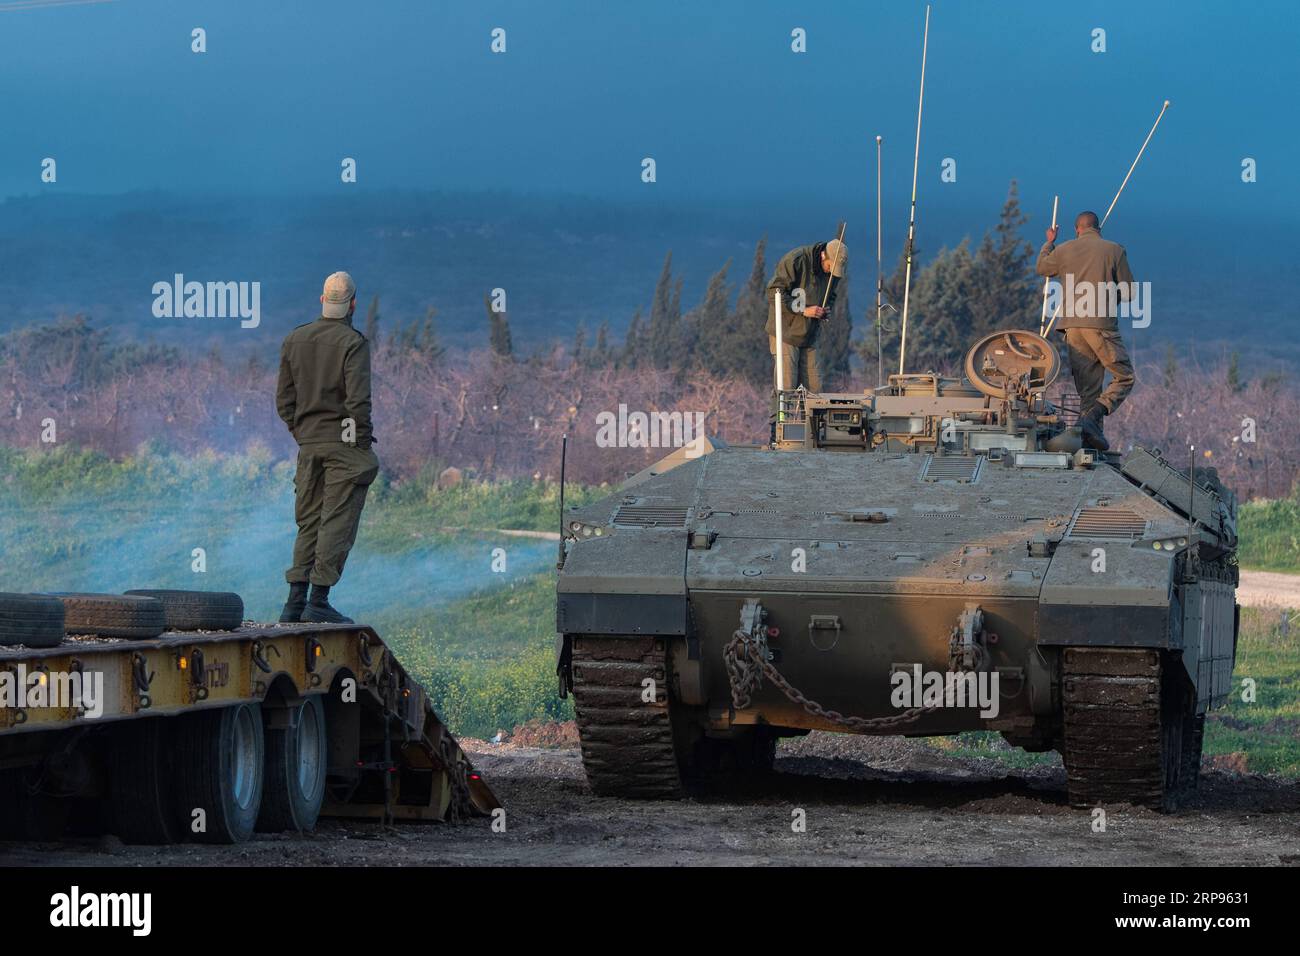 News Themen der Woche KW13 News Bilder des Tages (190325) -- GOLAN HEIGHTS, March 25, 2019 -- Israeli soldiers stand on an armored personnel carrier in the Israeli-occupied Golan Heights, on March 25, 2019. U.S. President Donald Trump on Monday signed a proclamation recognizing Israel s sovereignty over the disputed Golan Heights, marking a major shift in U.S. policy in the Middle East. ) MIDEAST-GOLAN HEIGHTS-ISRAEL-ARMY JINI/AyalxMargolin PUBLICATIONxNOTxINxCHN Stock Photo